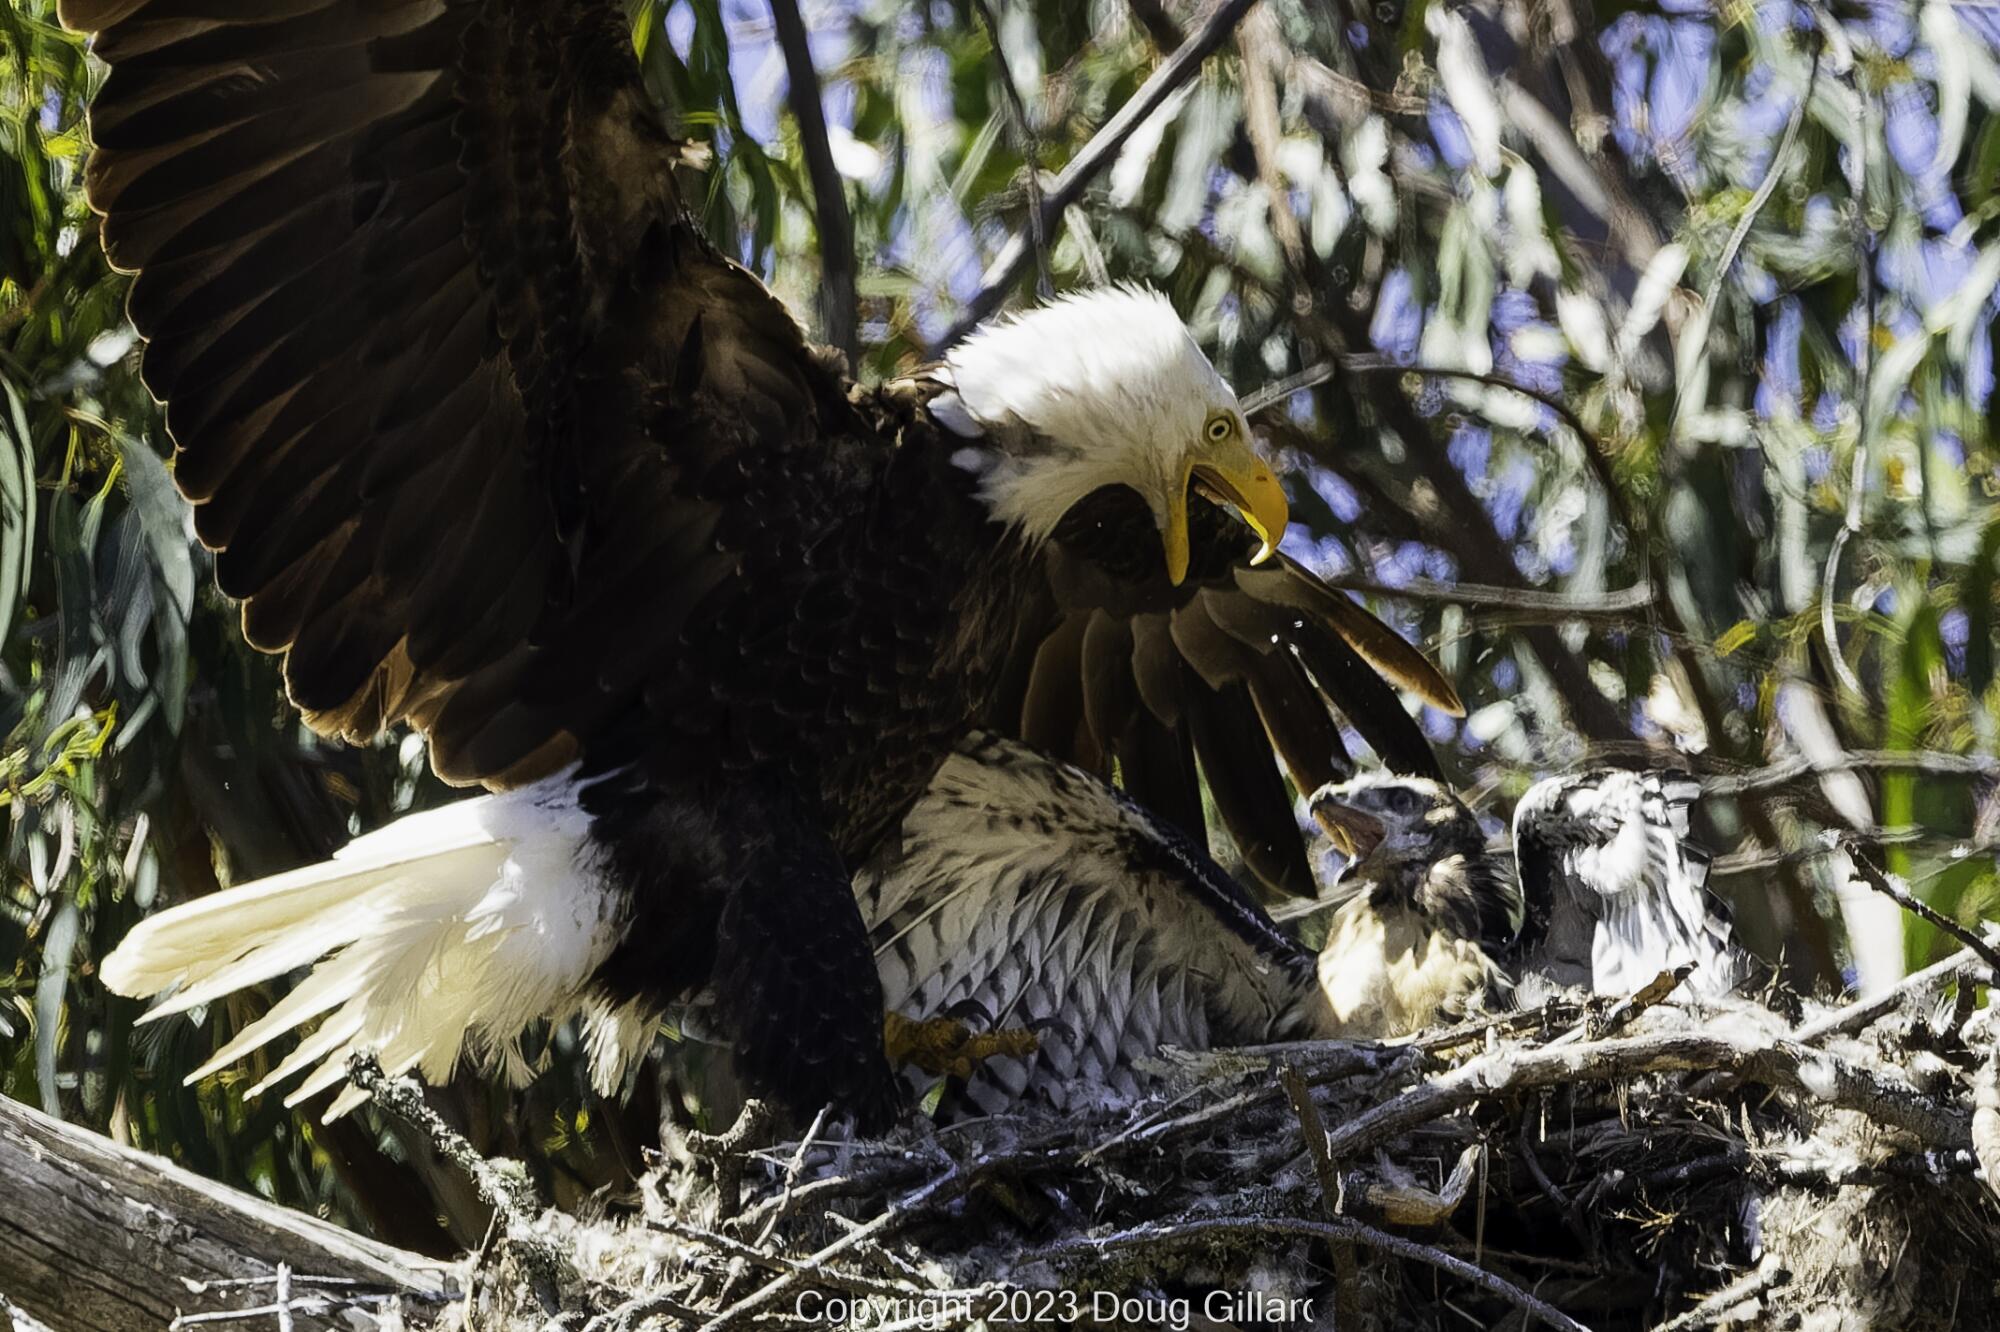 A bald eagle, wings spread, perches on the edge of a nest as a fledgling red-tailed hawk lifts its wings inside the nest.